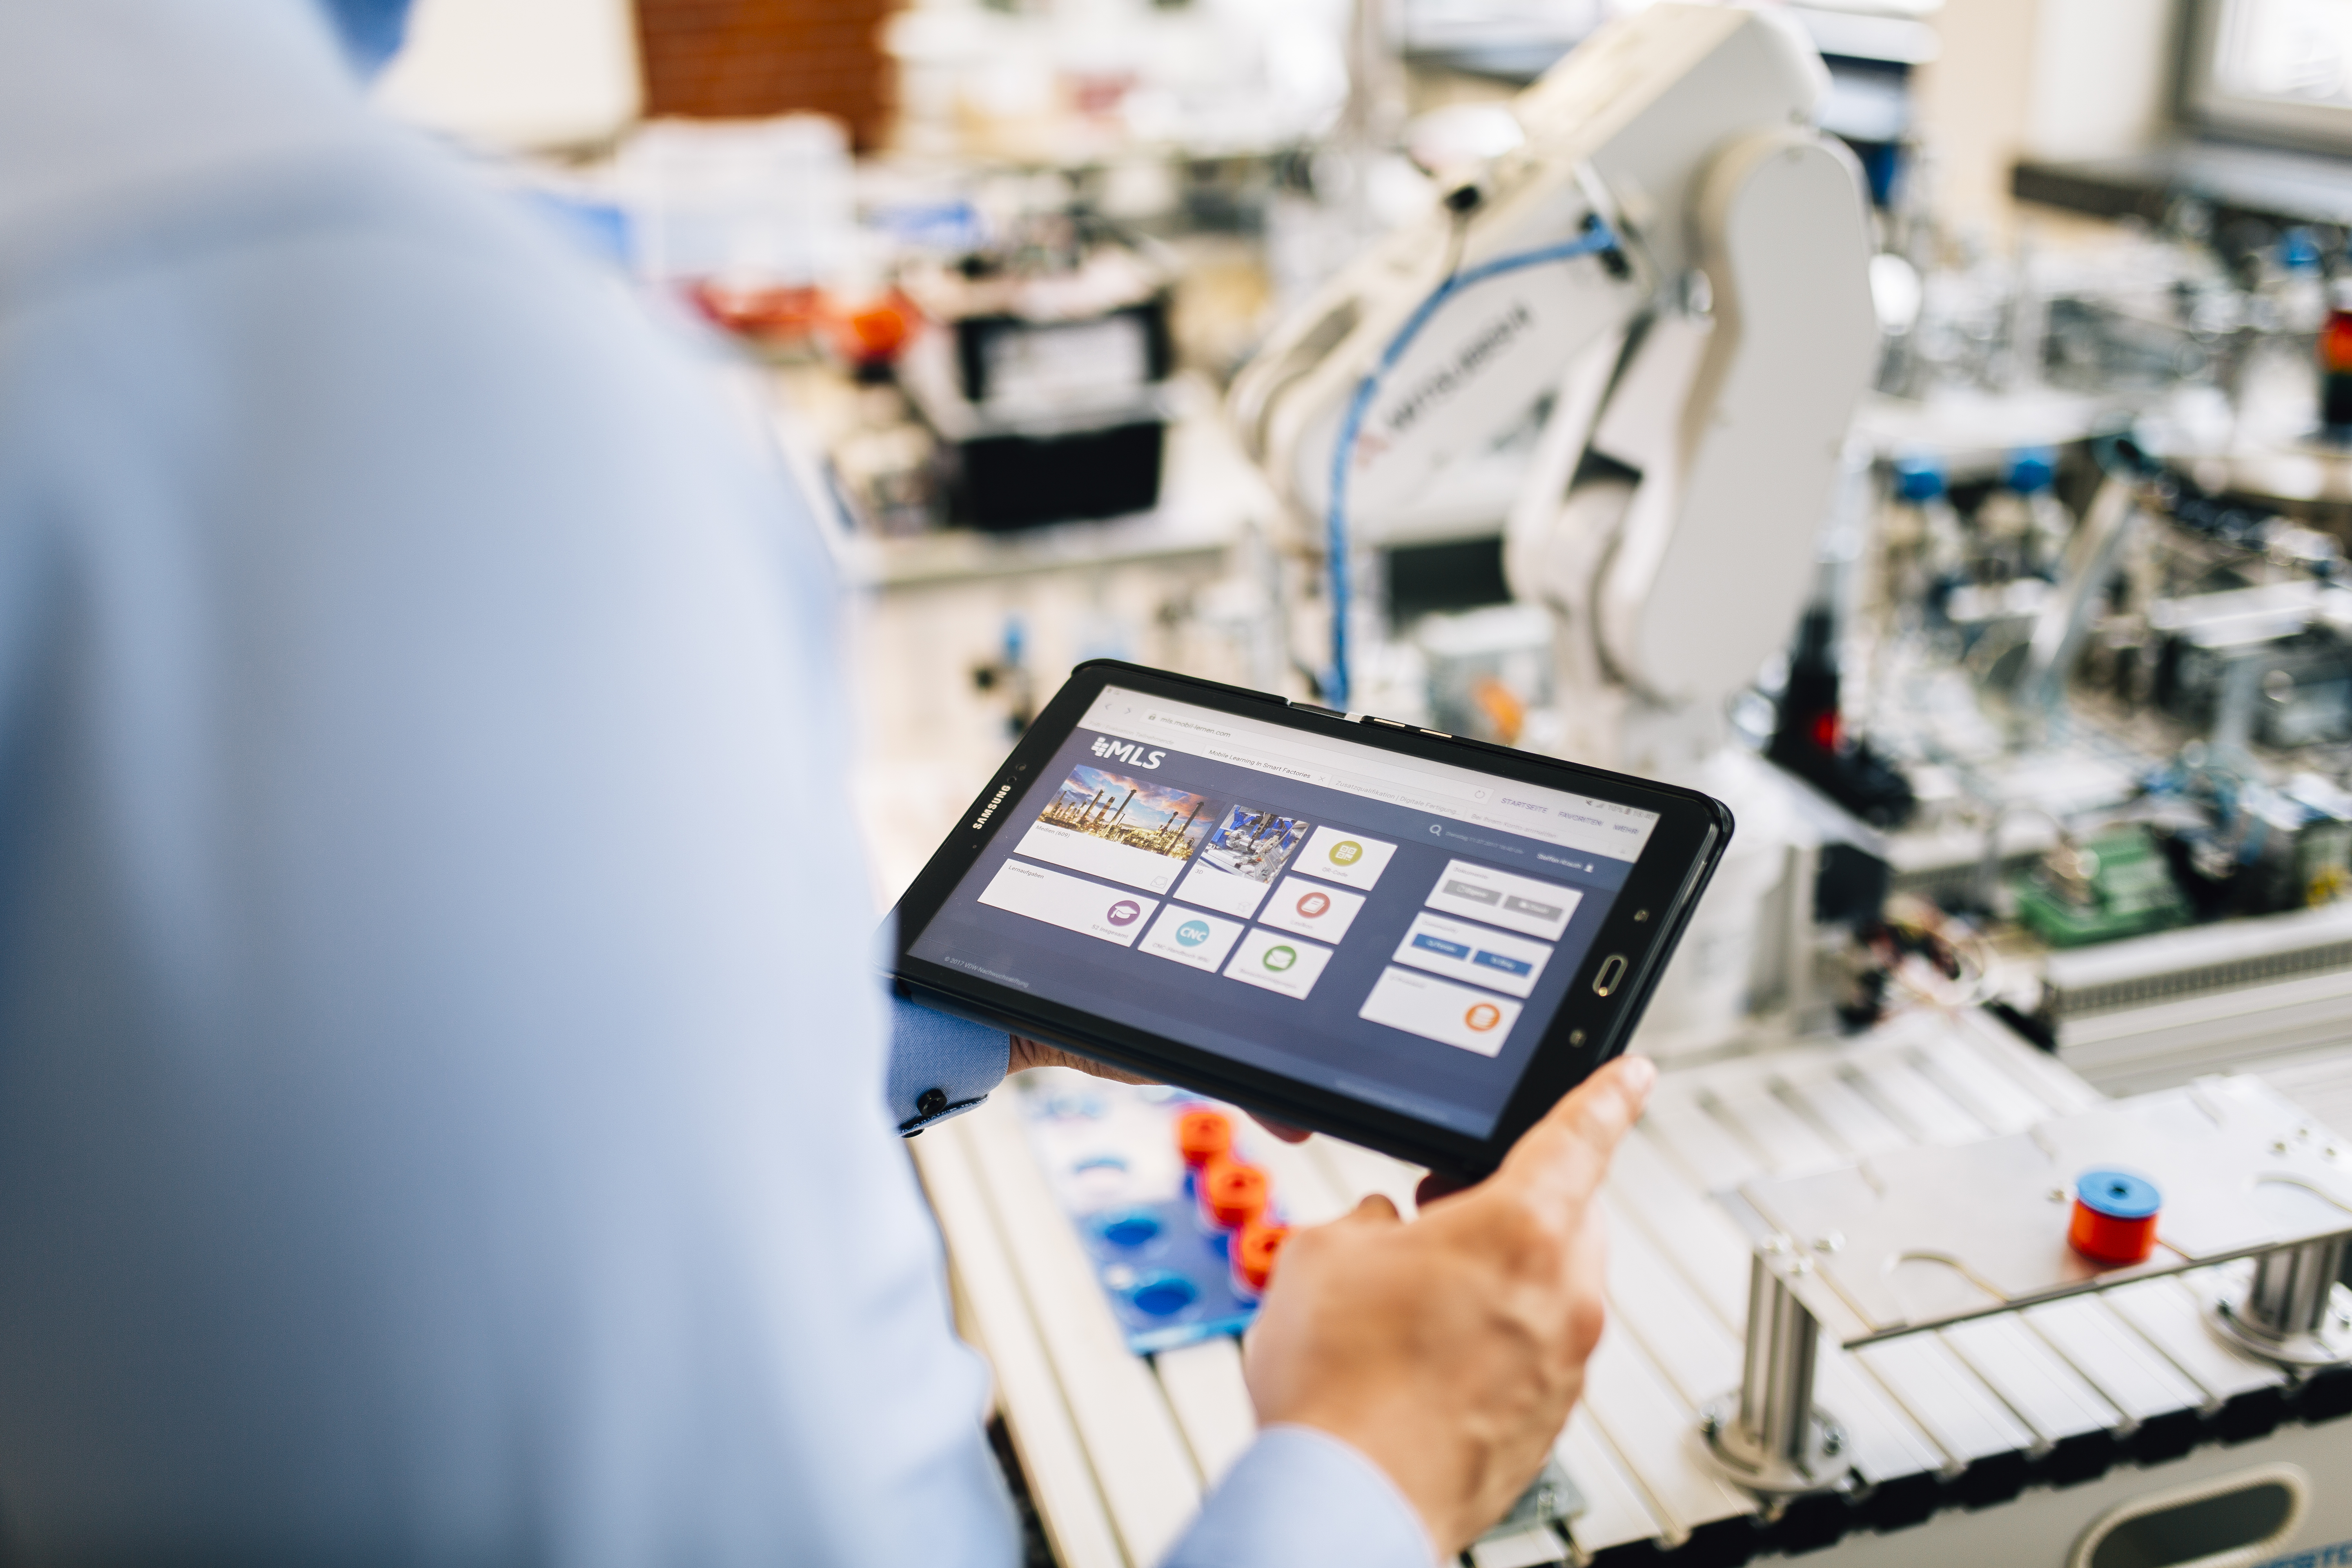 Mobile Learning in Smart Factories (MLS) – a working and learning ap-plication that provides retrievable, didactically prepared, context-relevant information over the Internet